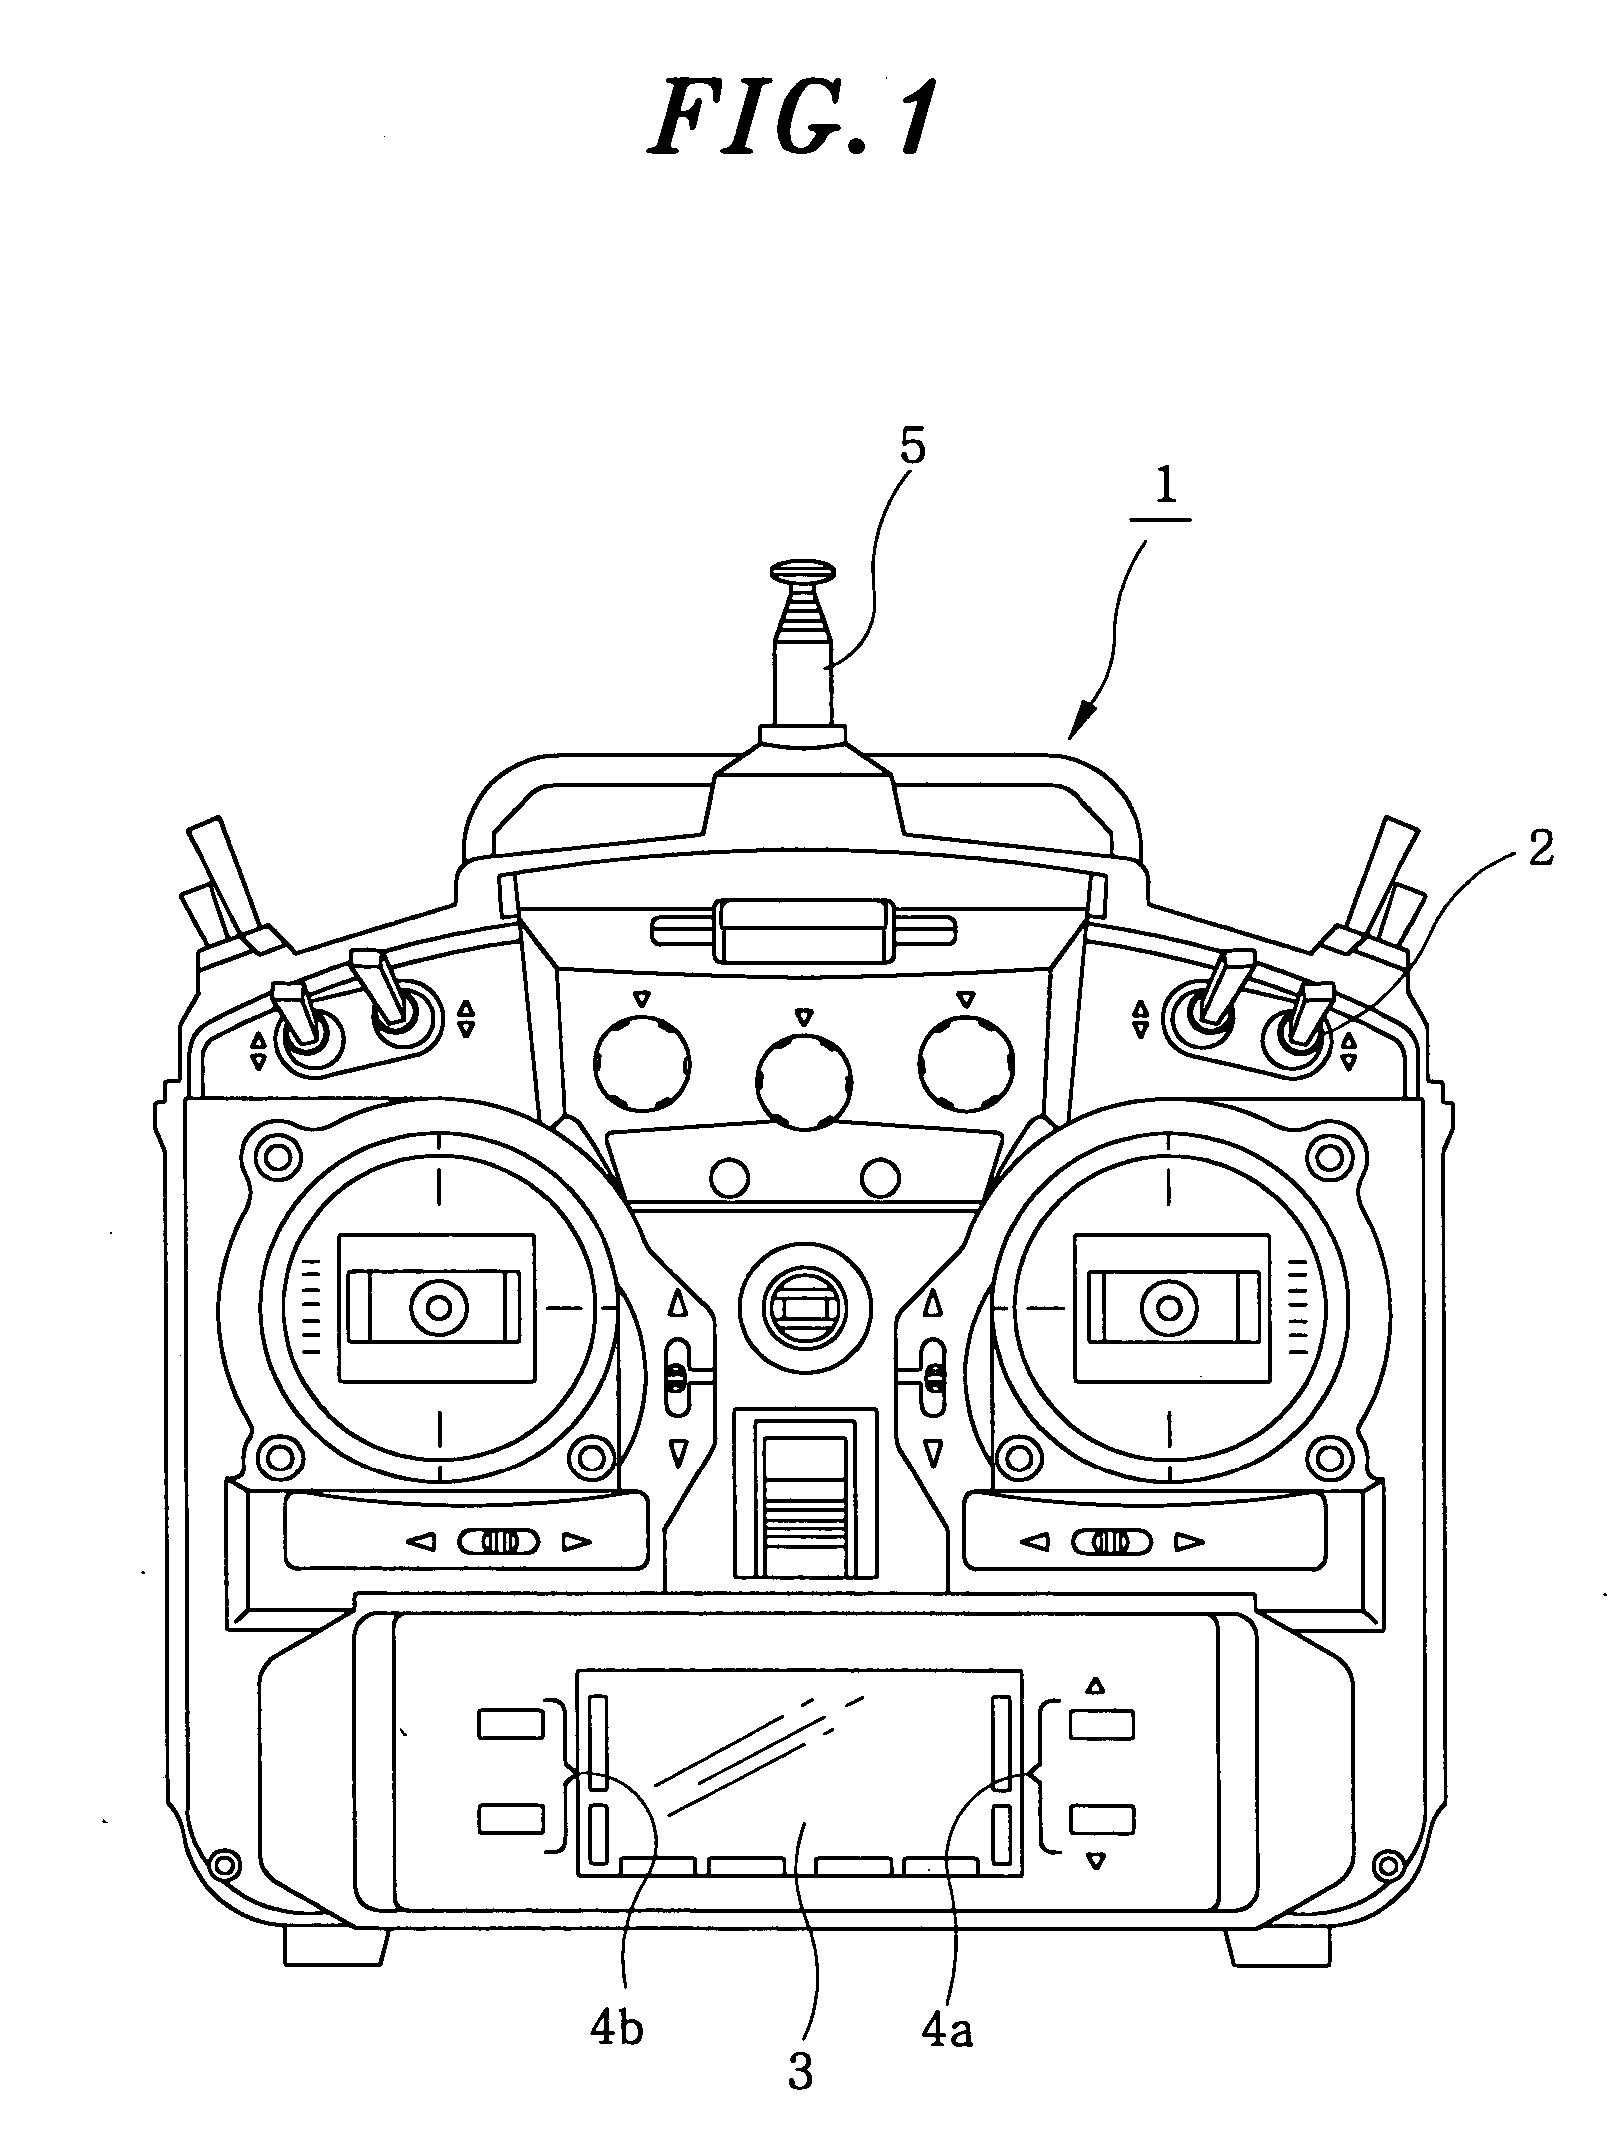 Radio remote control unit with a playback function